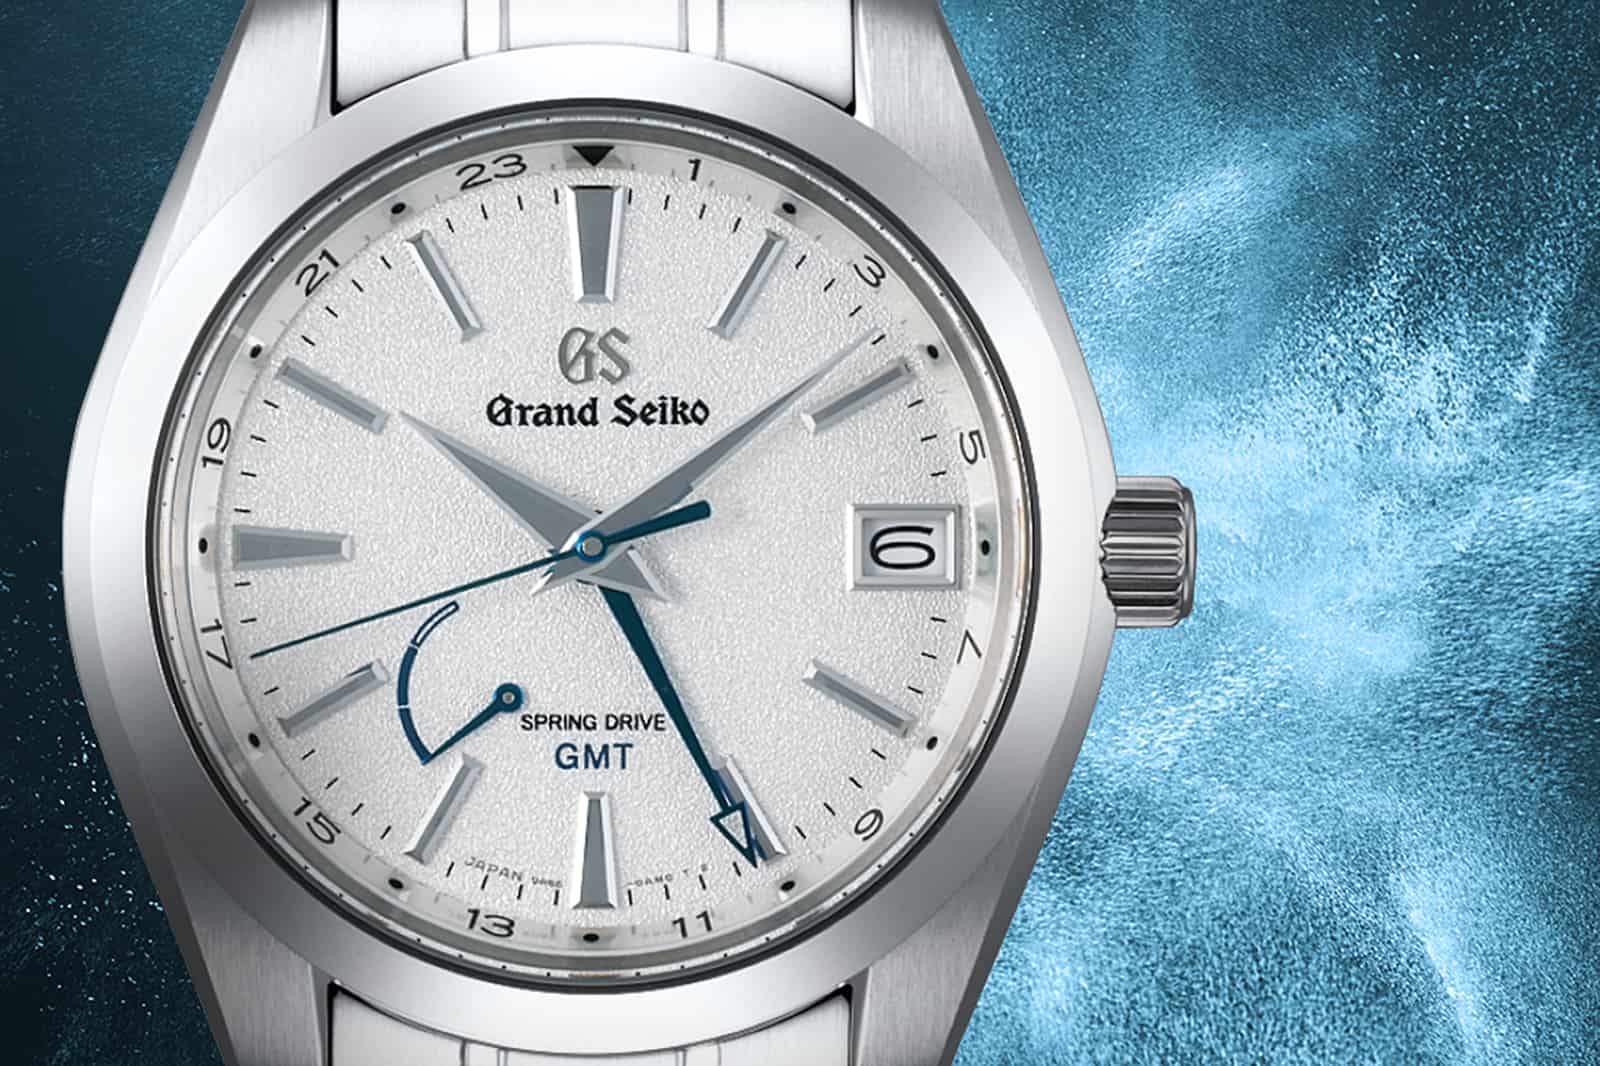 Introducing the Grand Seiko Spring Drive GMT Ref. SBGE249 (Limited